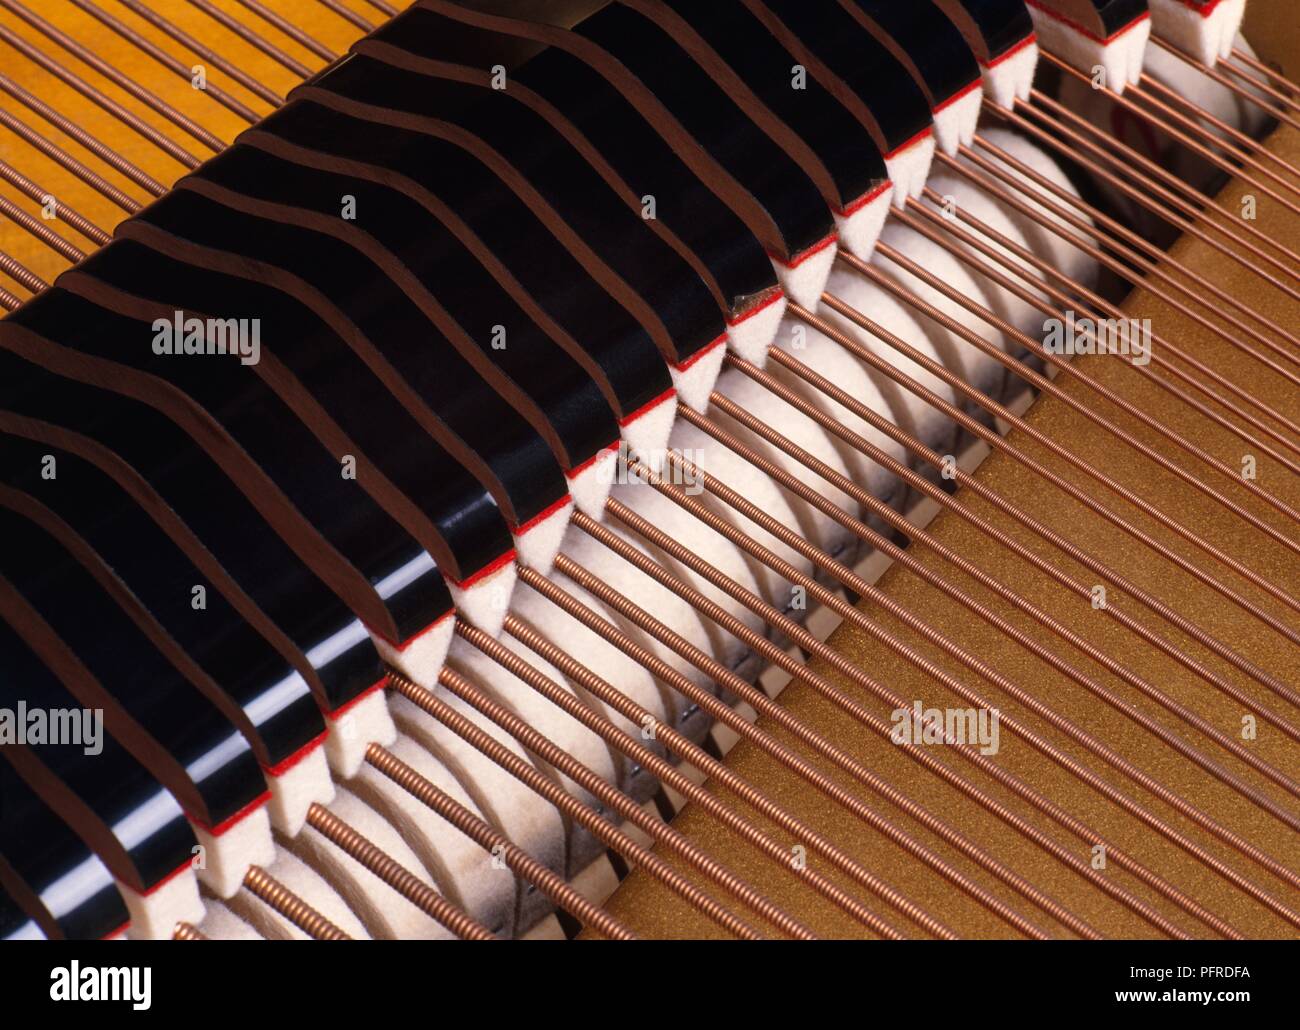 Piano dampers on strings Stock Photo - Alamy